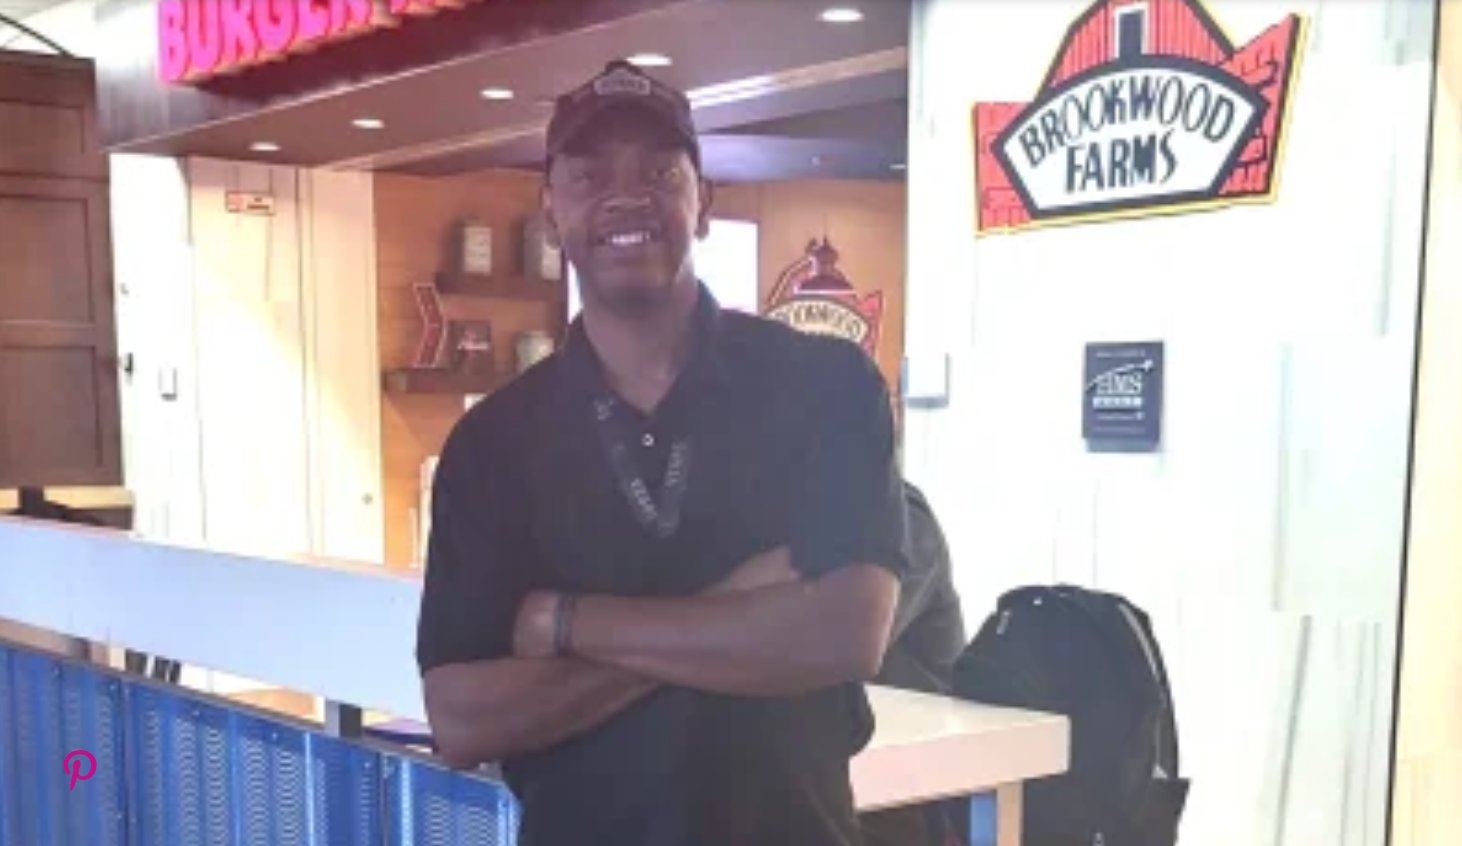 Burger King Employee Who Never Missed Work In 27 Years Buys First Home Thanks To Online Donations